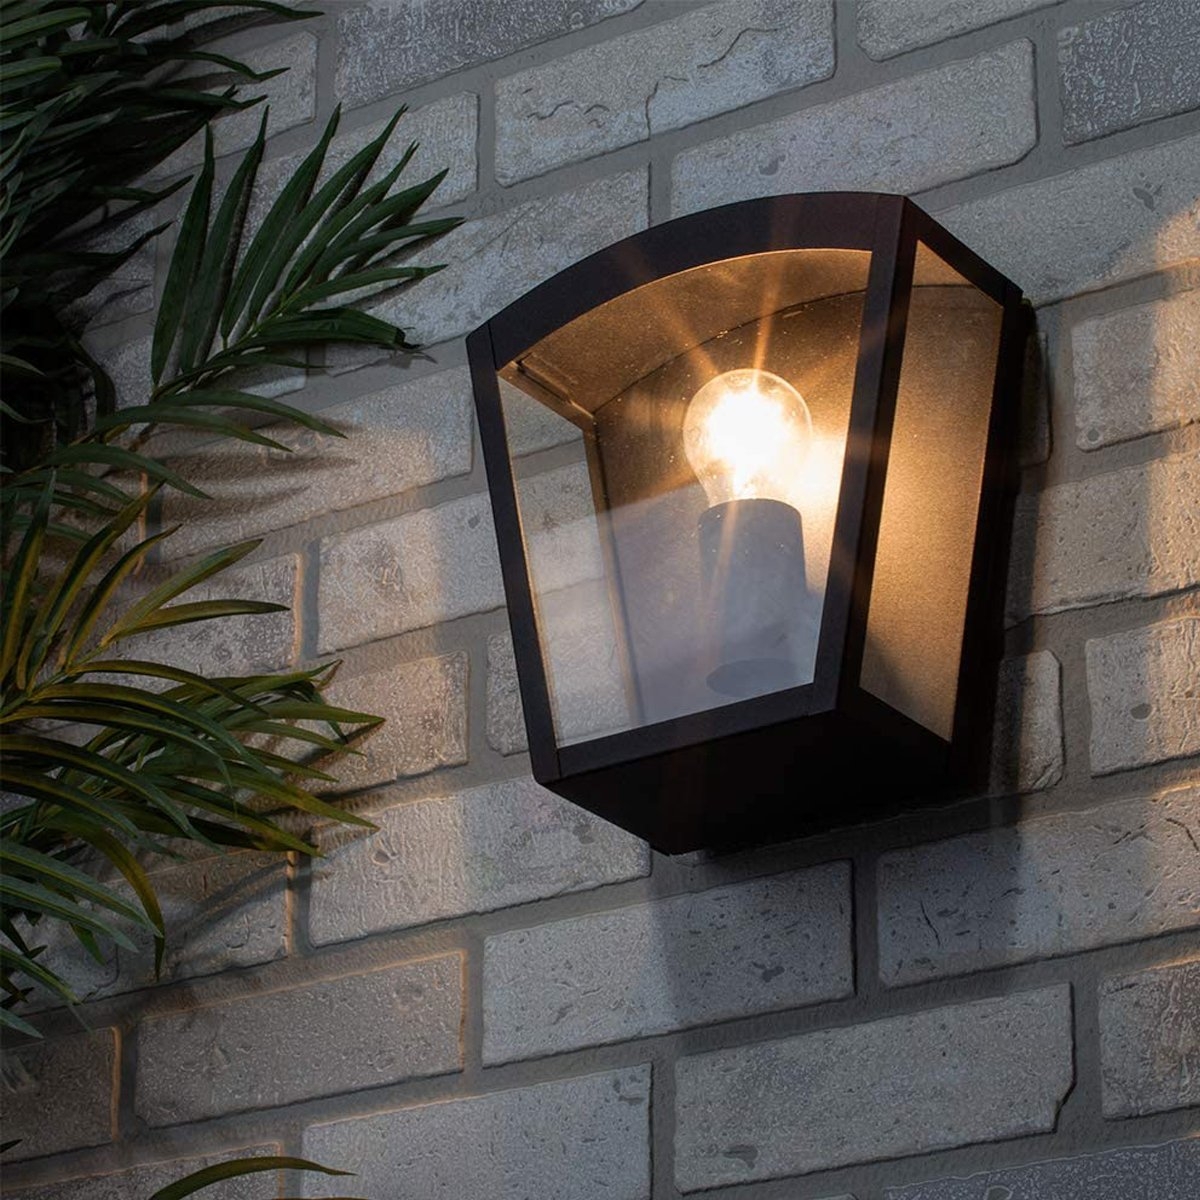 Curved Top Lantern Wall Light – Choice Of Colour Black – Outdoor Wall Light – CGC Retail Outlet